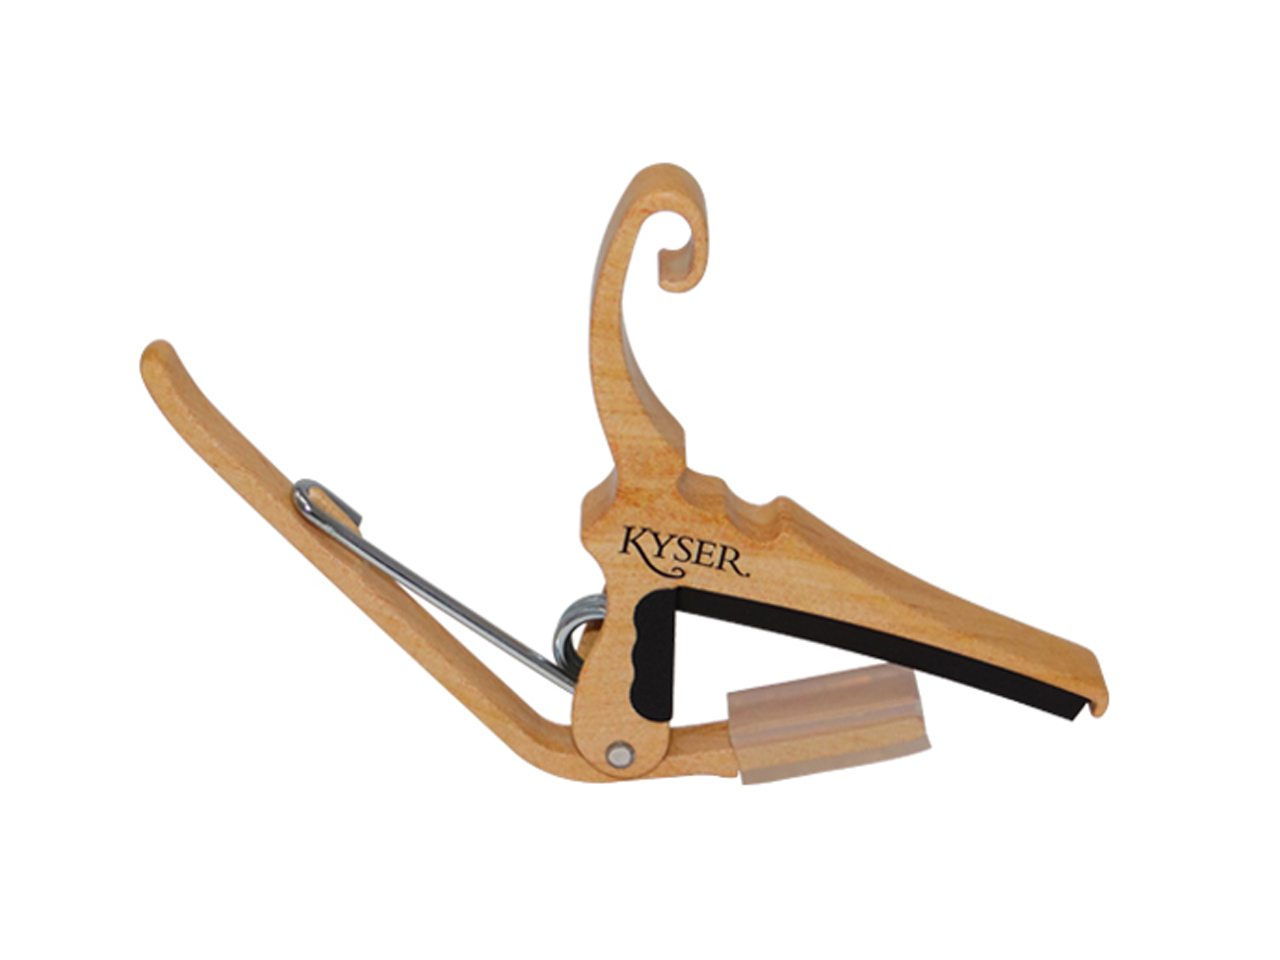 KYSER(カイザー) Acoustic Guitar Capos 6 STRING MAPLE / KG6MA (カポタスト)